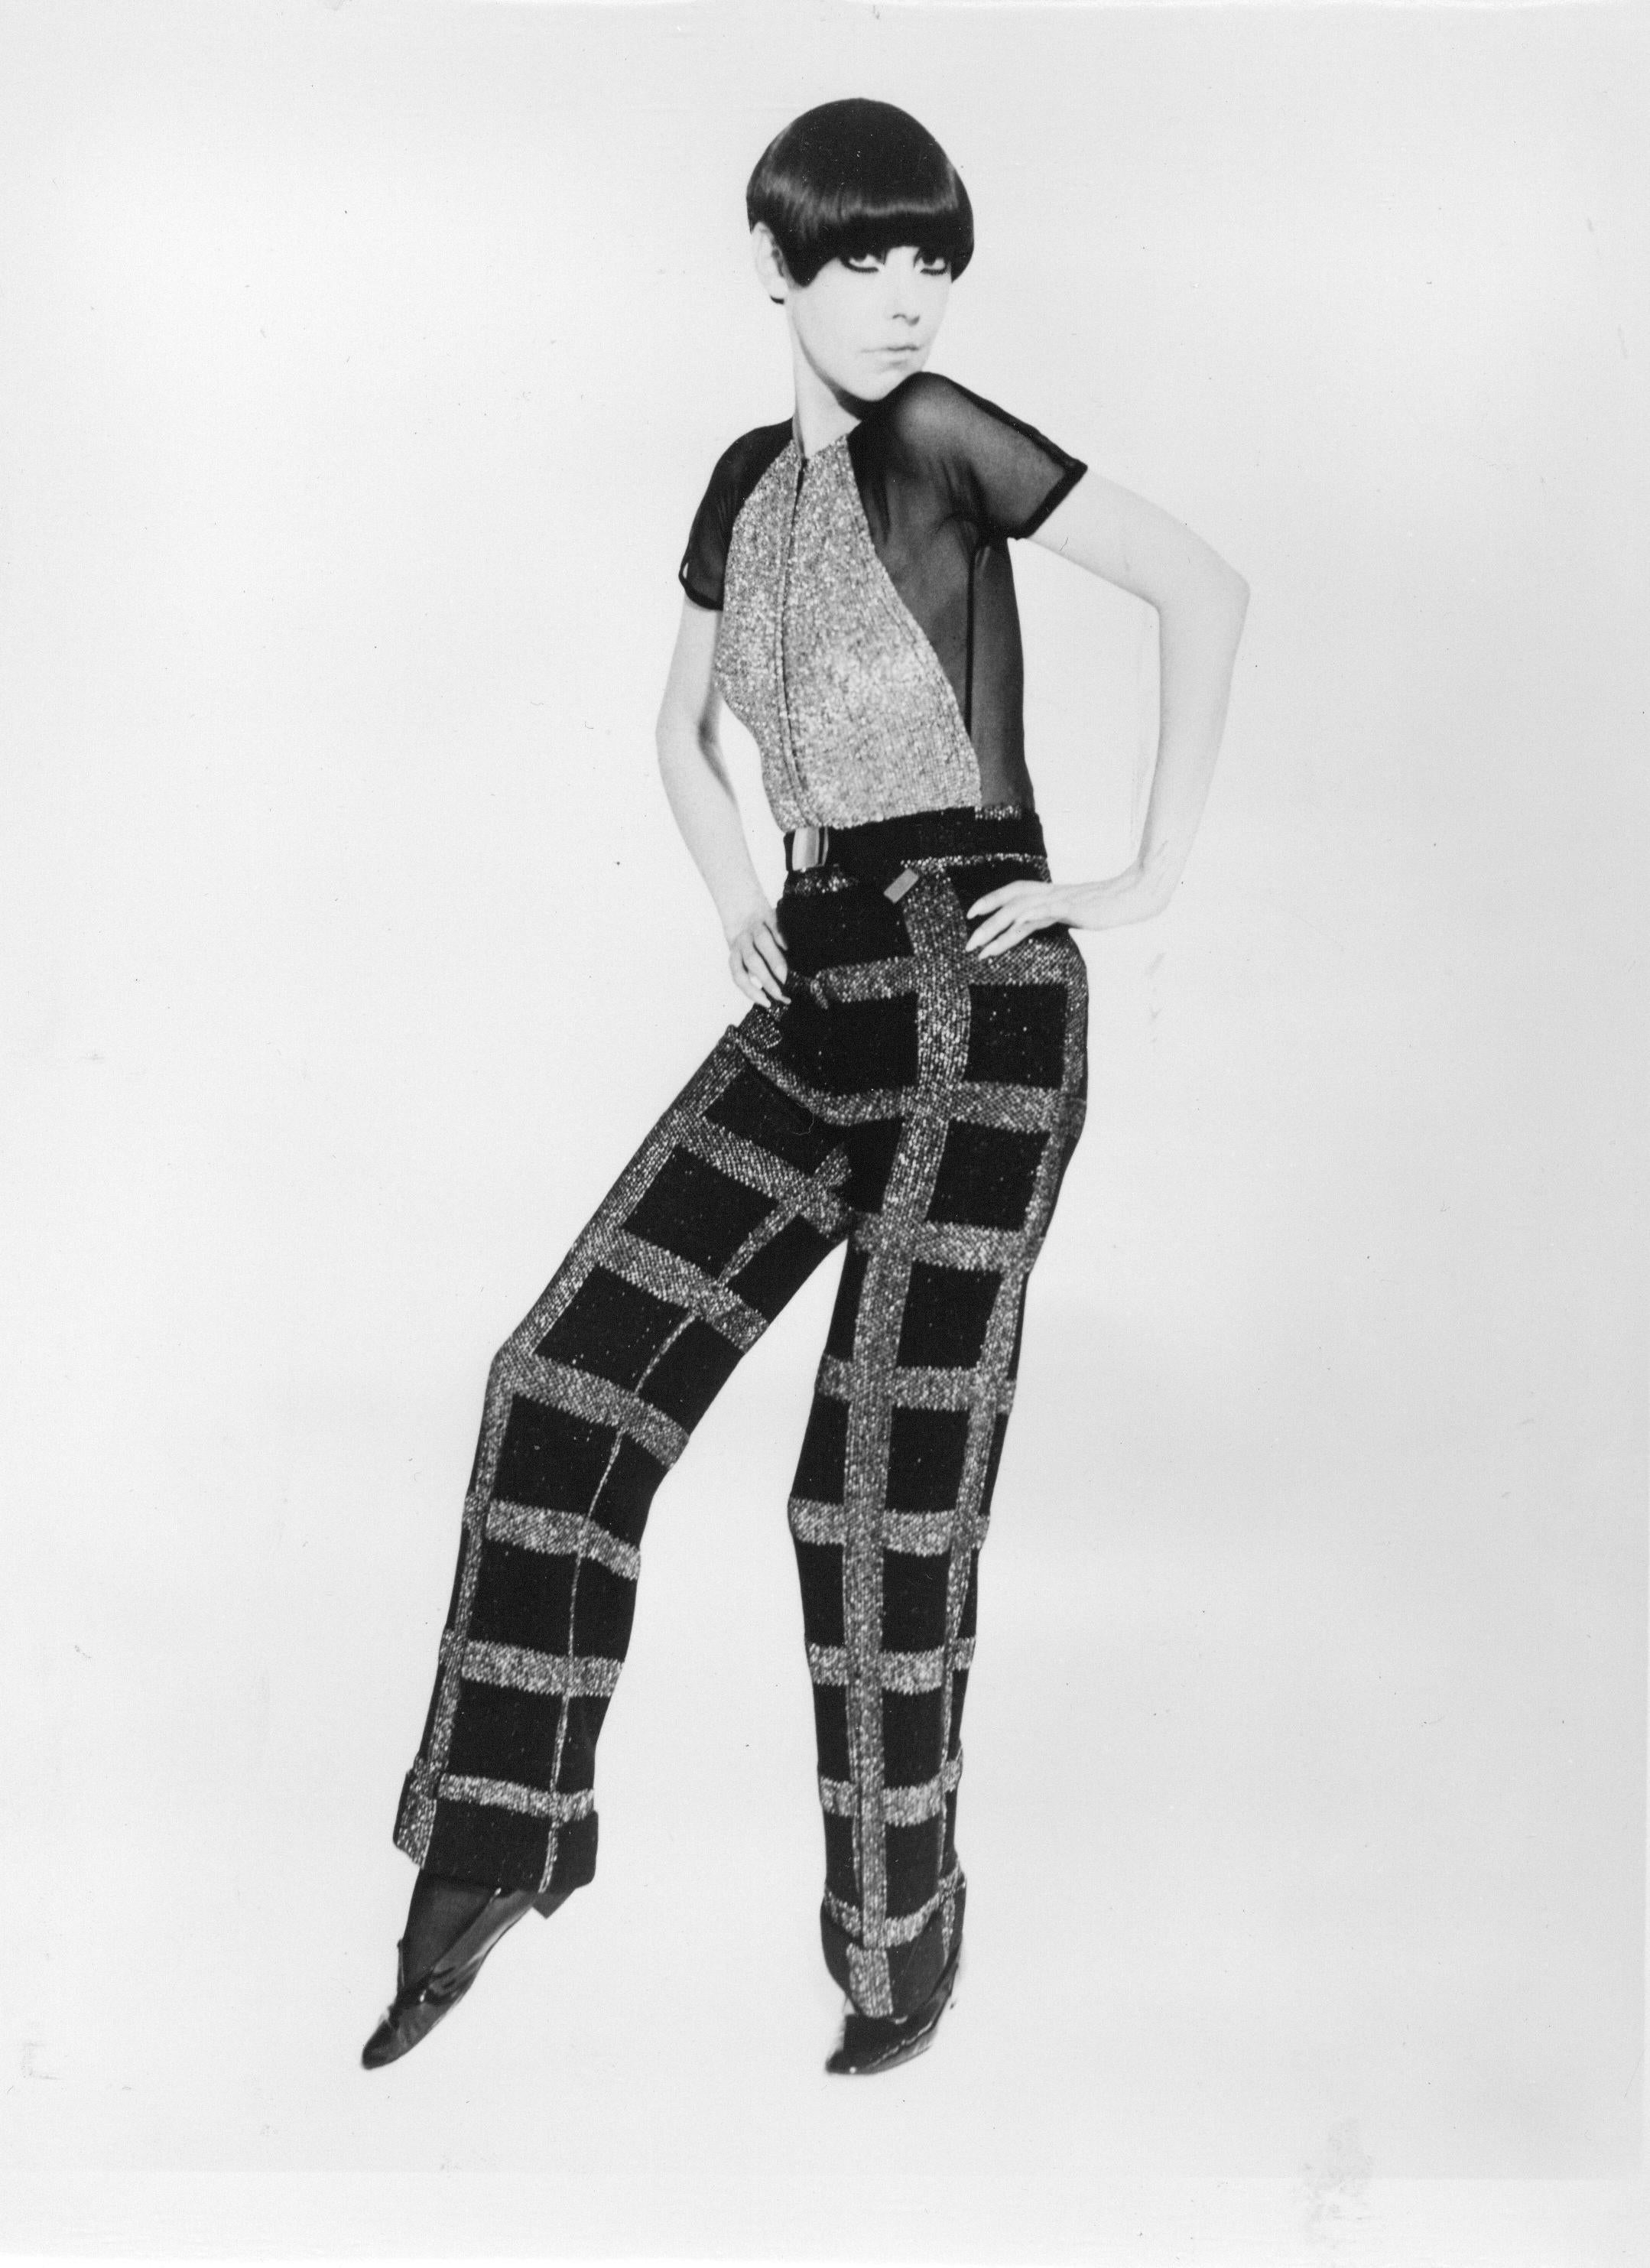 Unknown Black and White Photograph - 70s Fashion: Model in Style Vintage Original Photograph